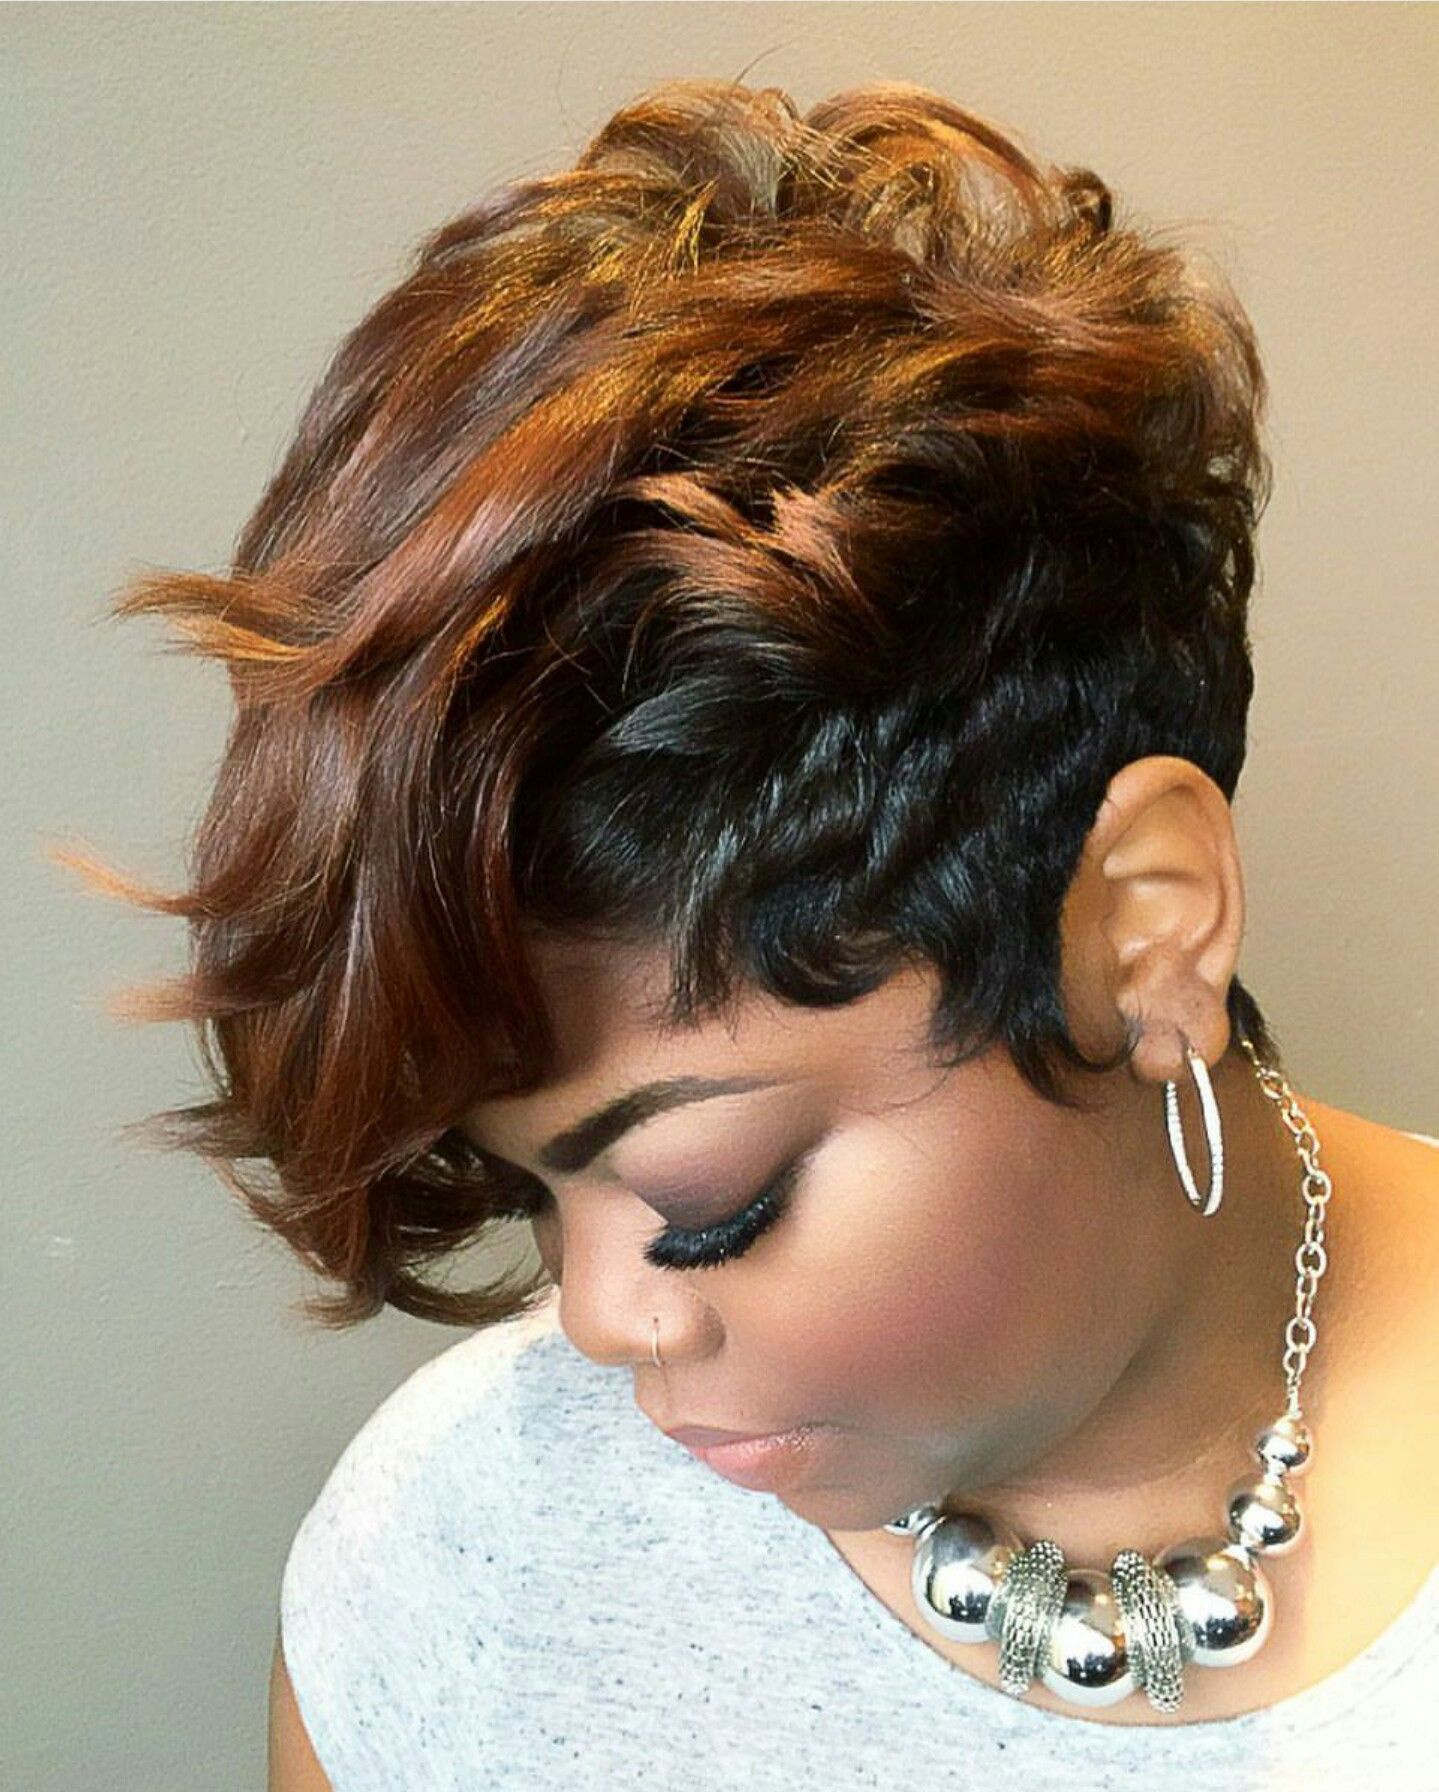 Curls and Waves Short Hairstyle